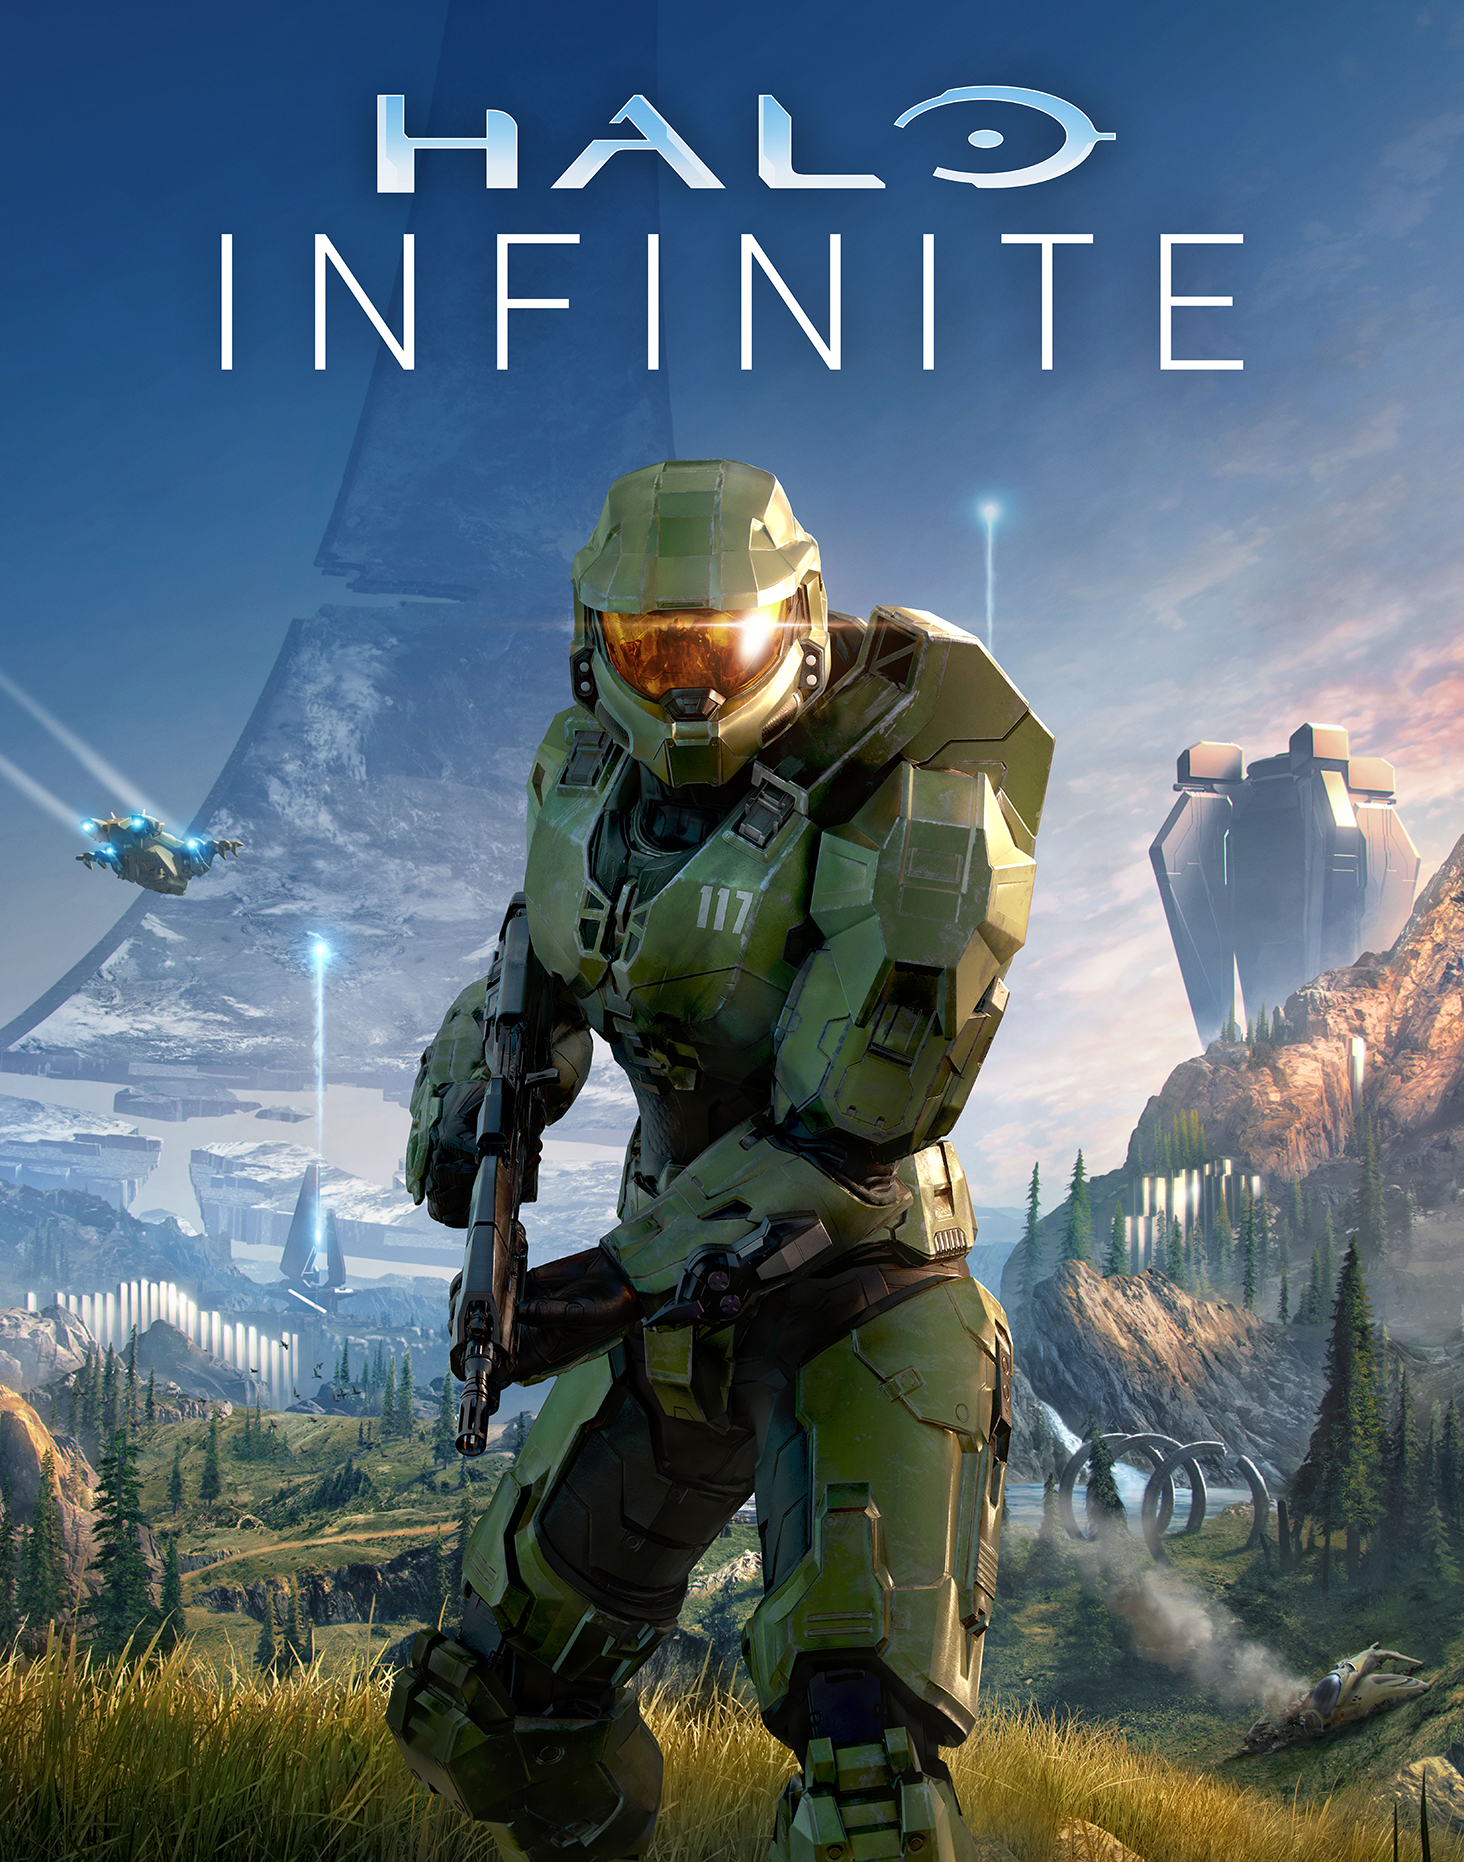 halo_infinite_keyart_primary_vertical-748a0db8be6c497d86f83ad76265060f.png